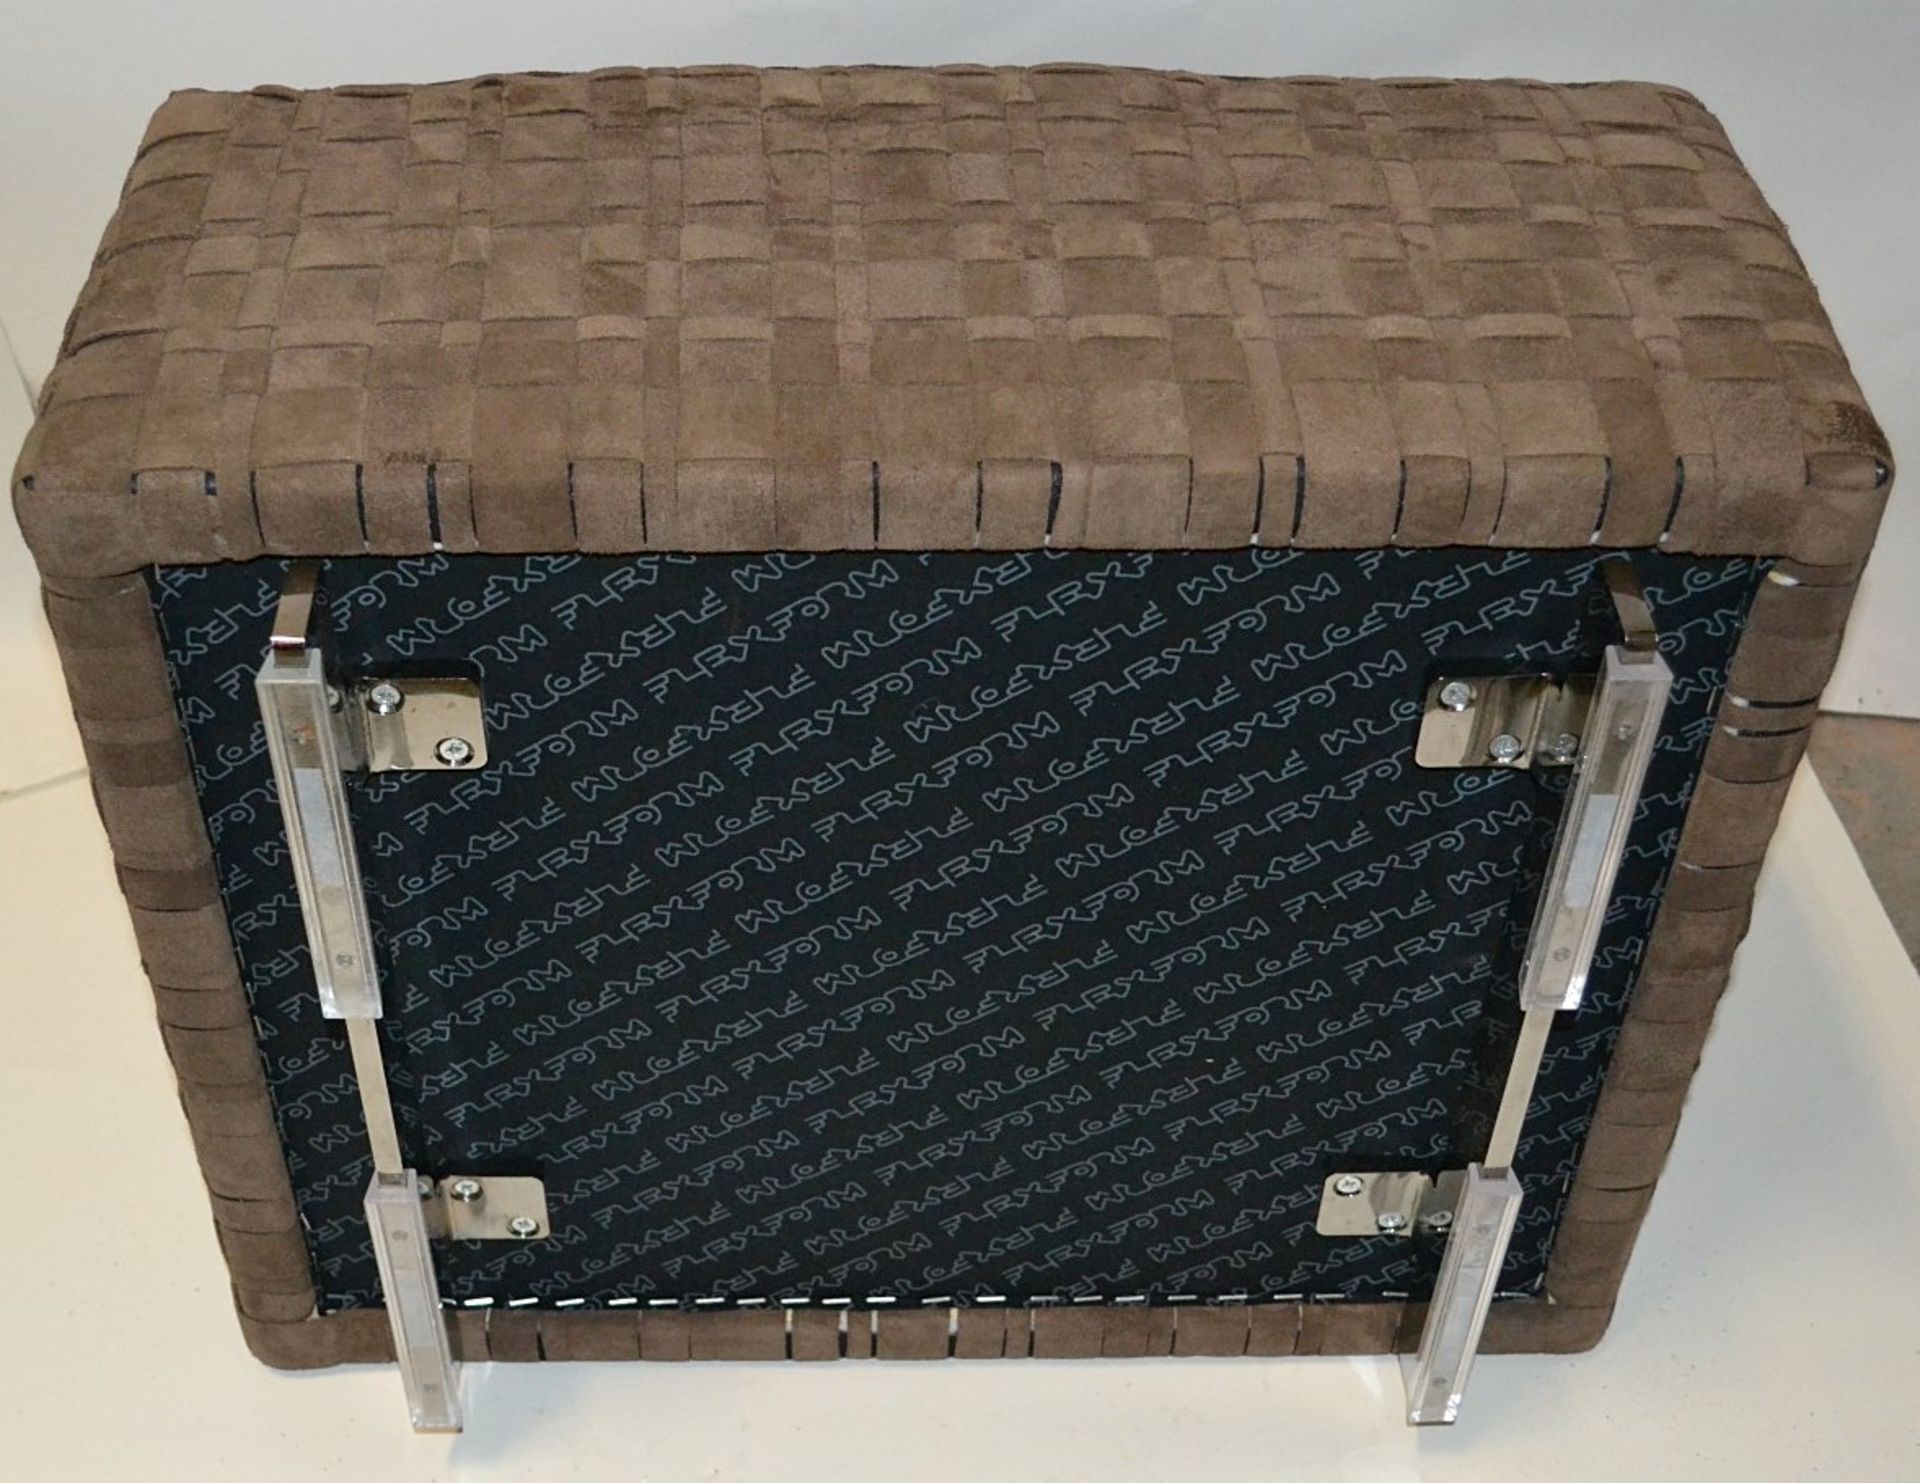 1 x Flexform Bangkok Ottoman - Elegantly Upholstered In Woven Strips of Brown Suede Leather - - Image 3 of 4